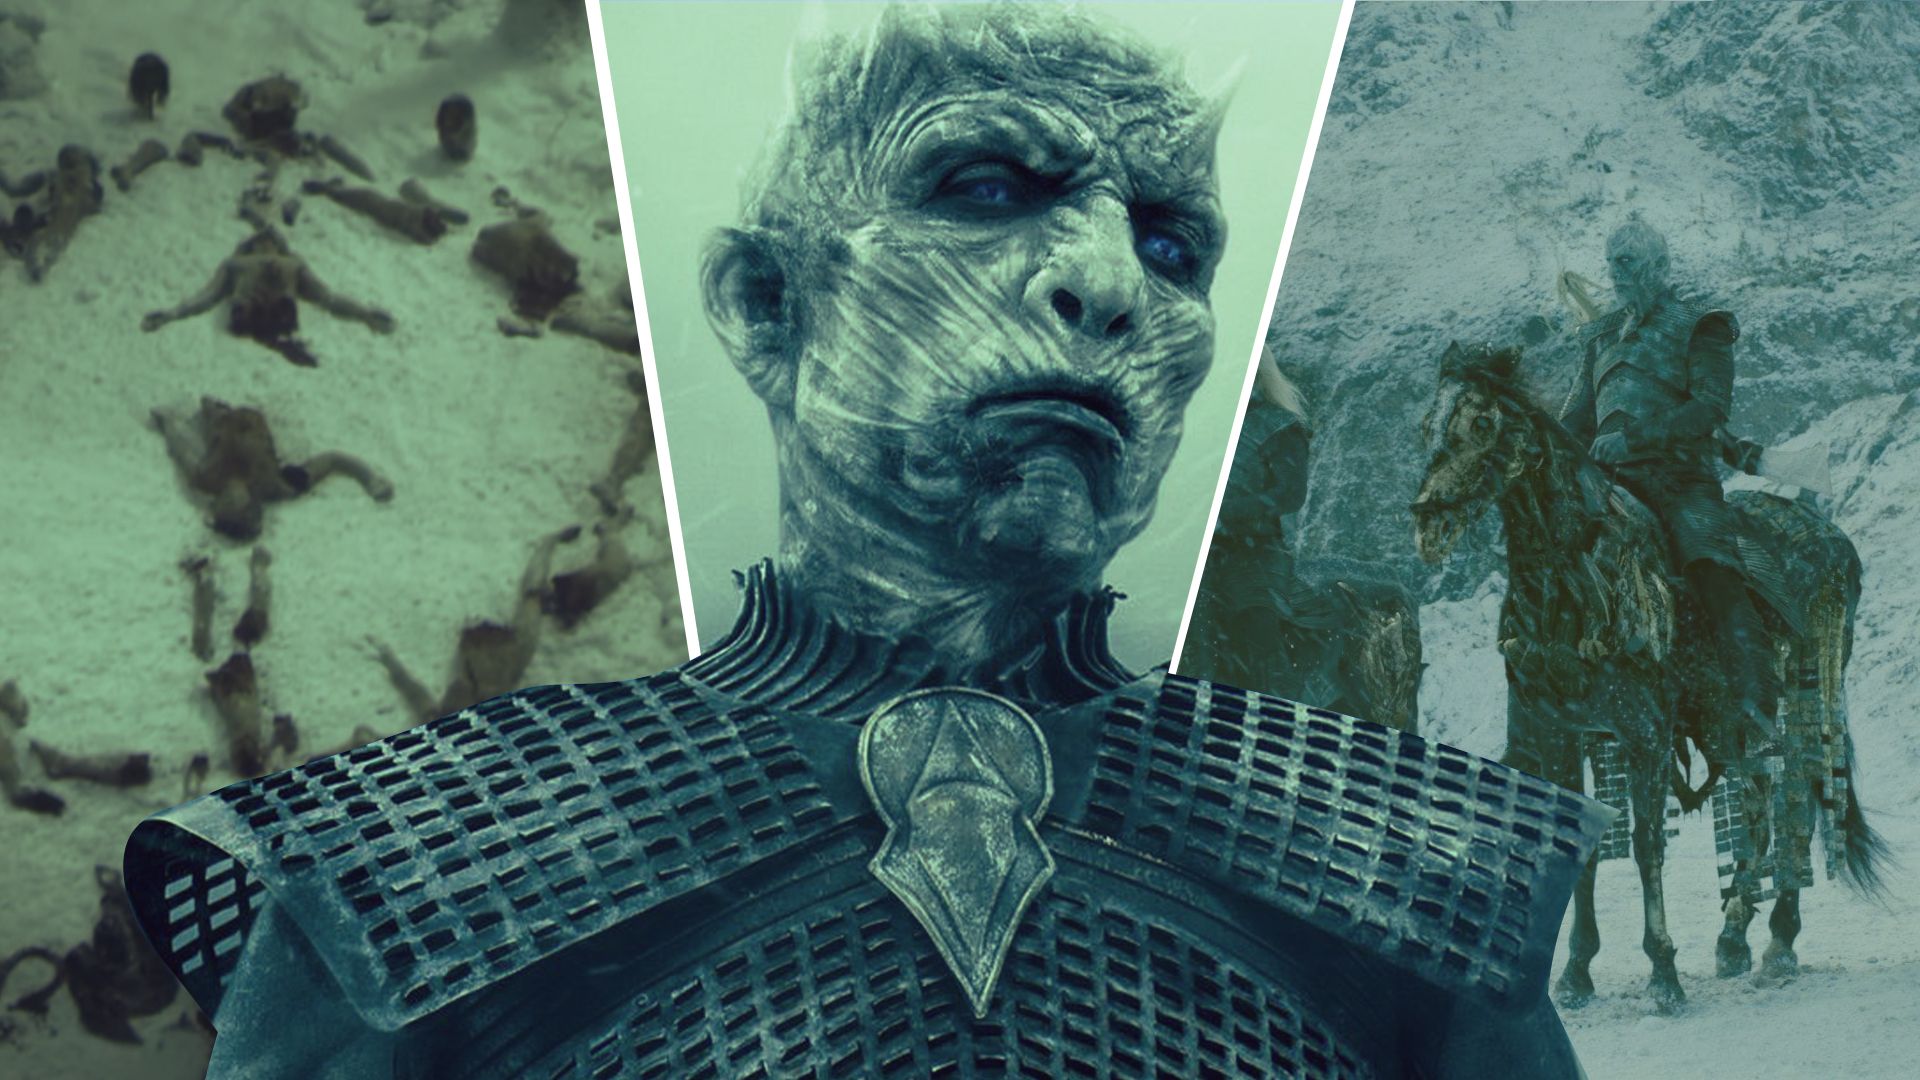 An edited image of The Night King and bodies cut up into a pattern in Game of Thrones